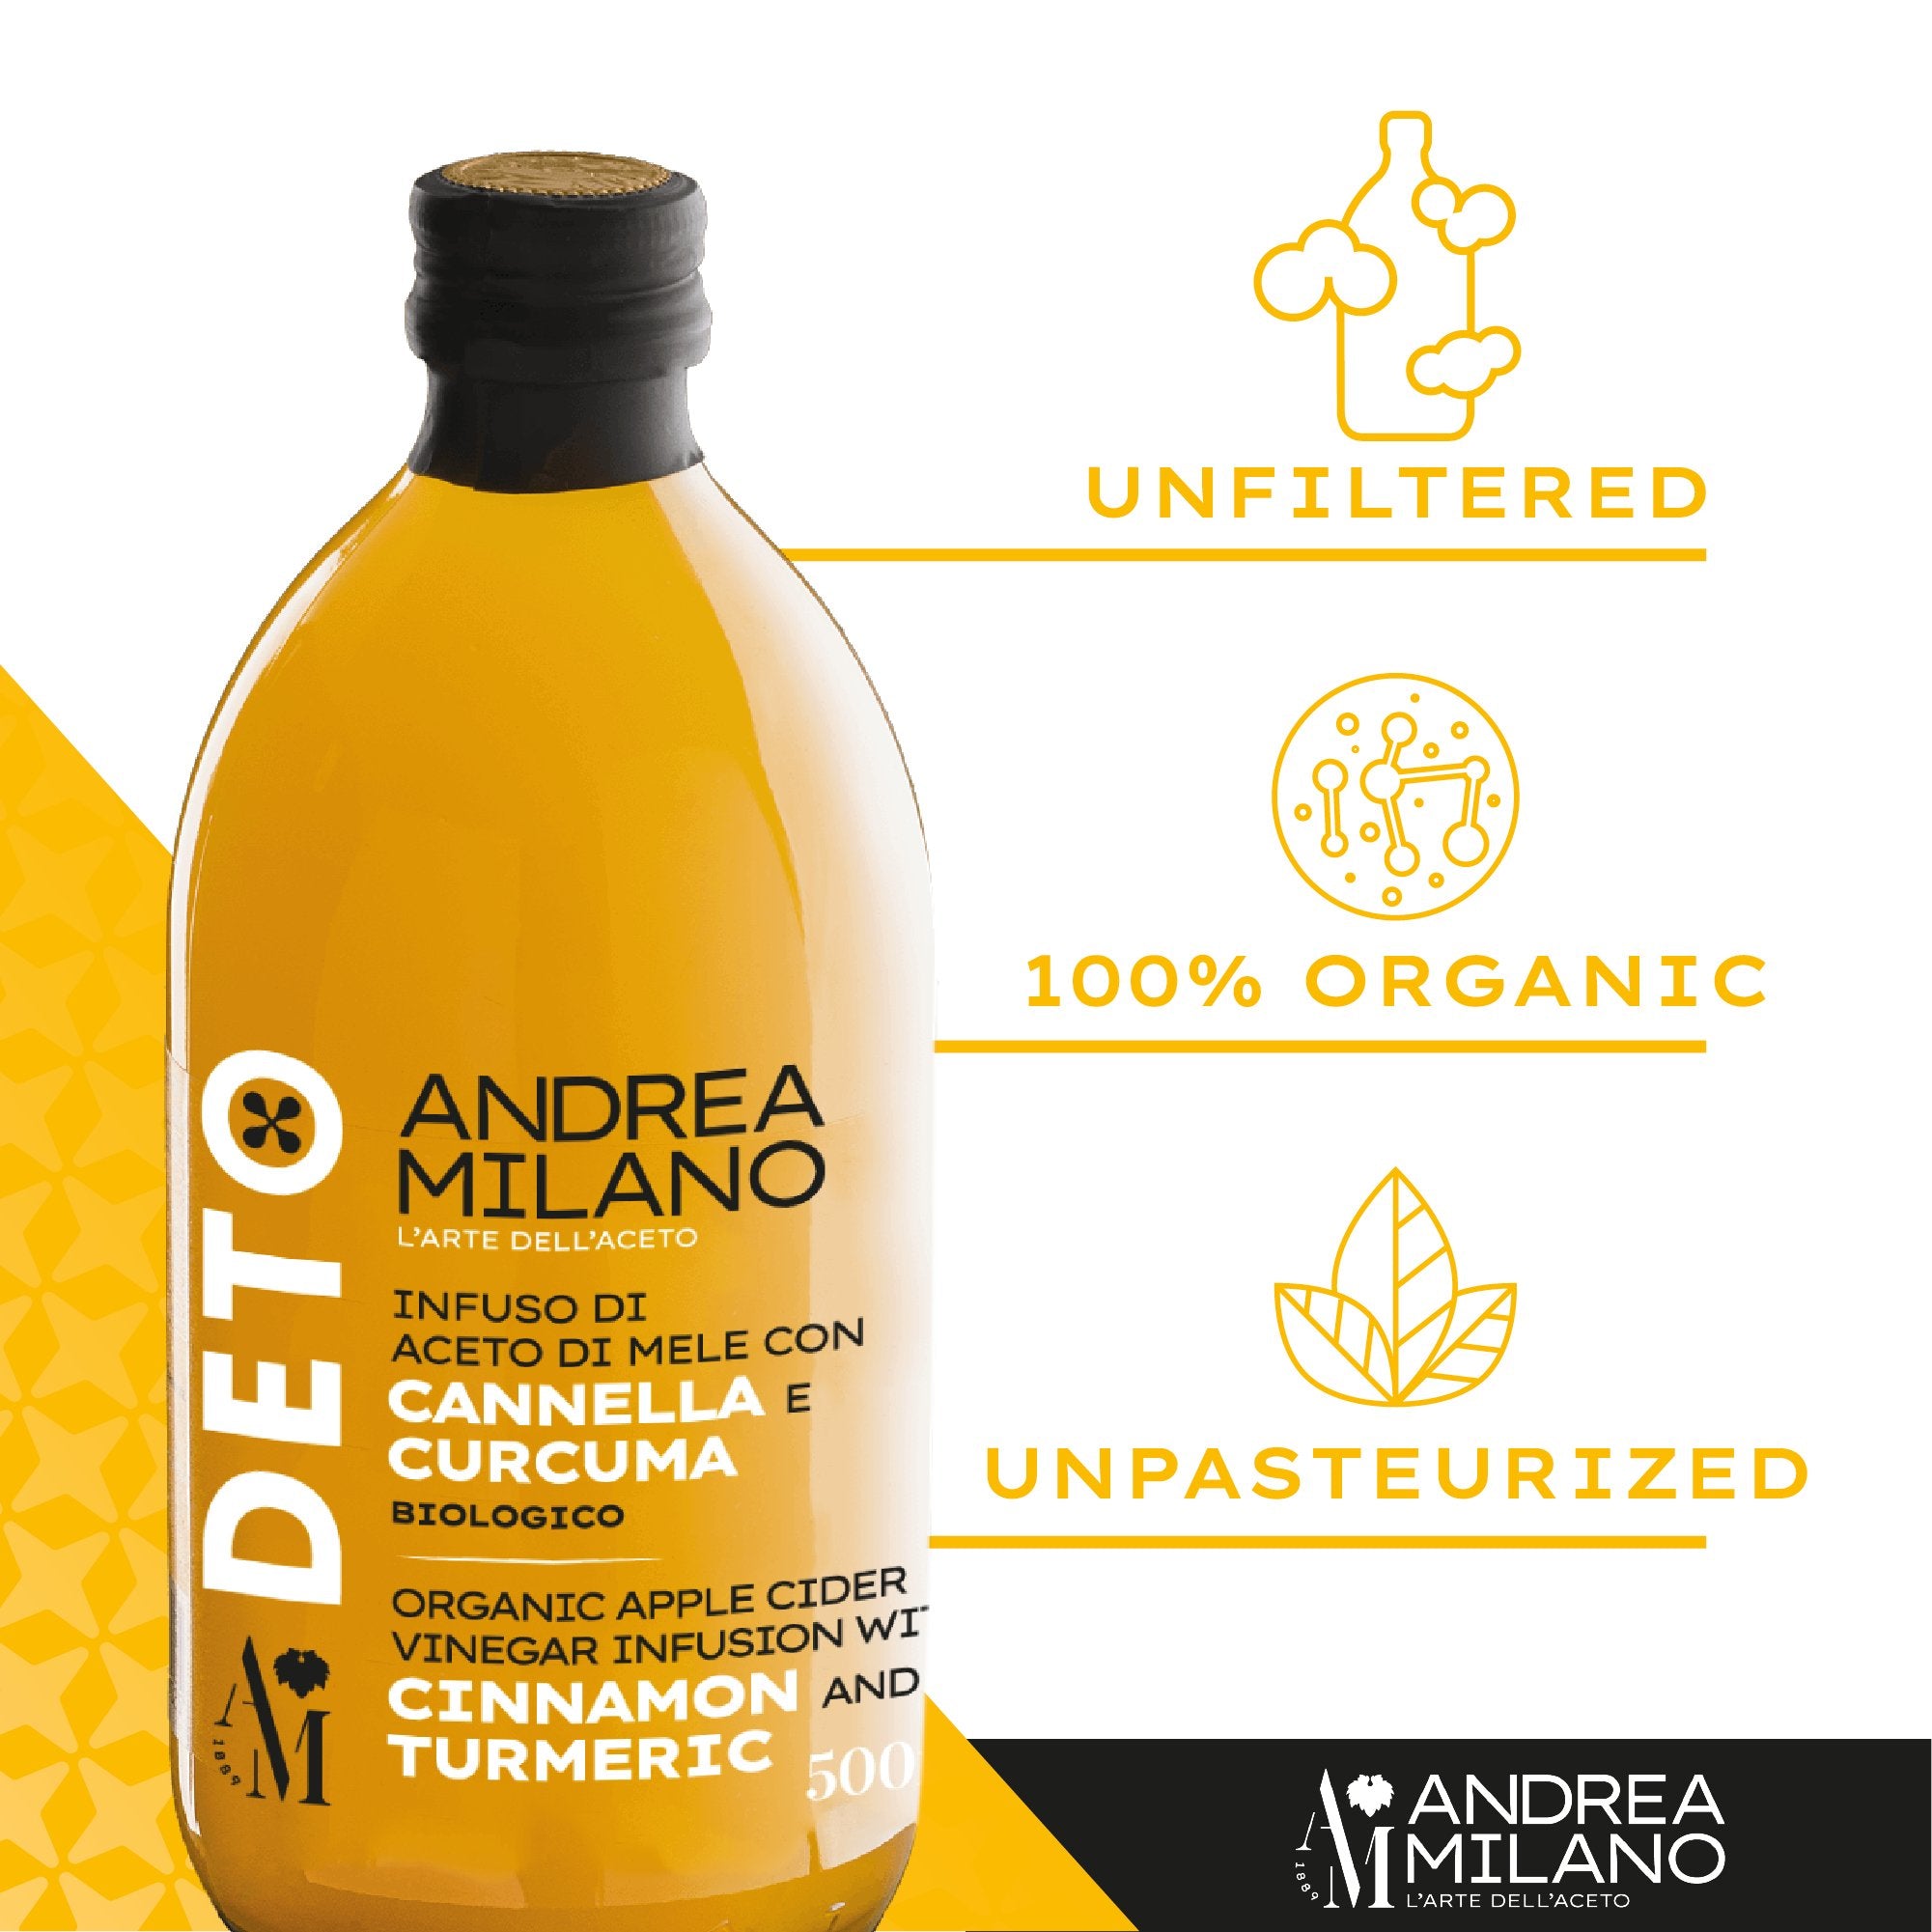 Features of Deto organic apple cider vinegar infusion with cinnamon and turmeric by Andrea Milano.